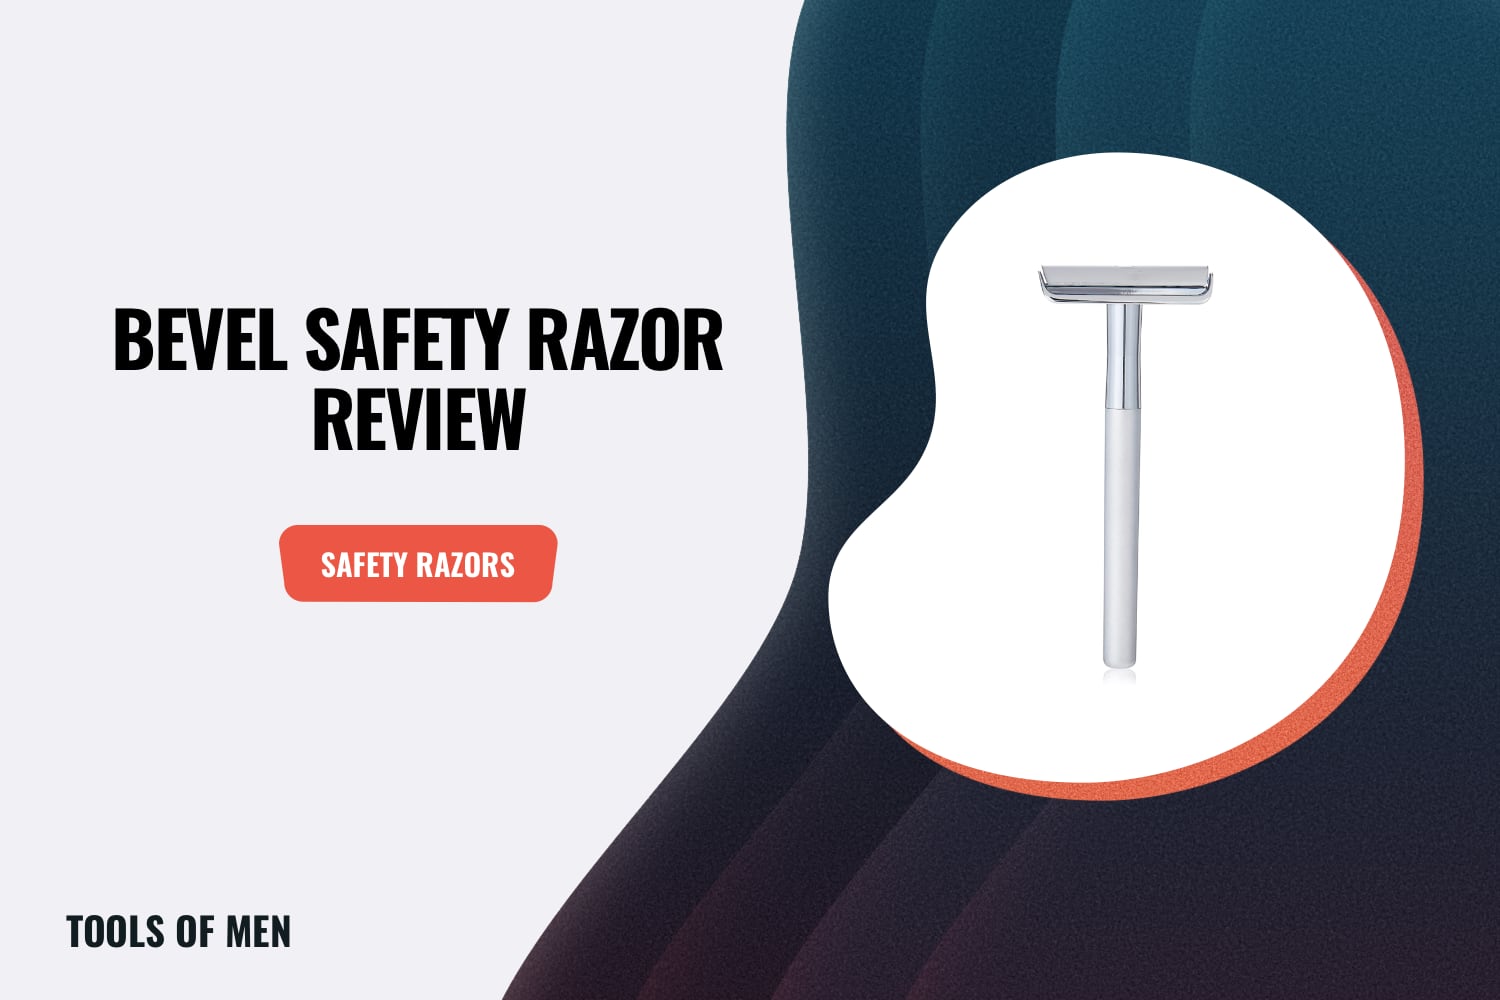 generic graphic image for bevel razor review